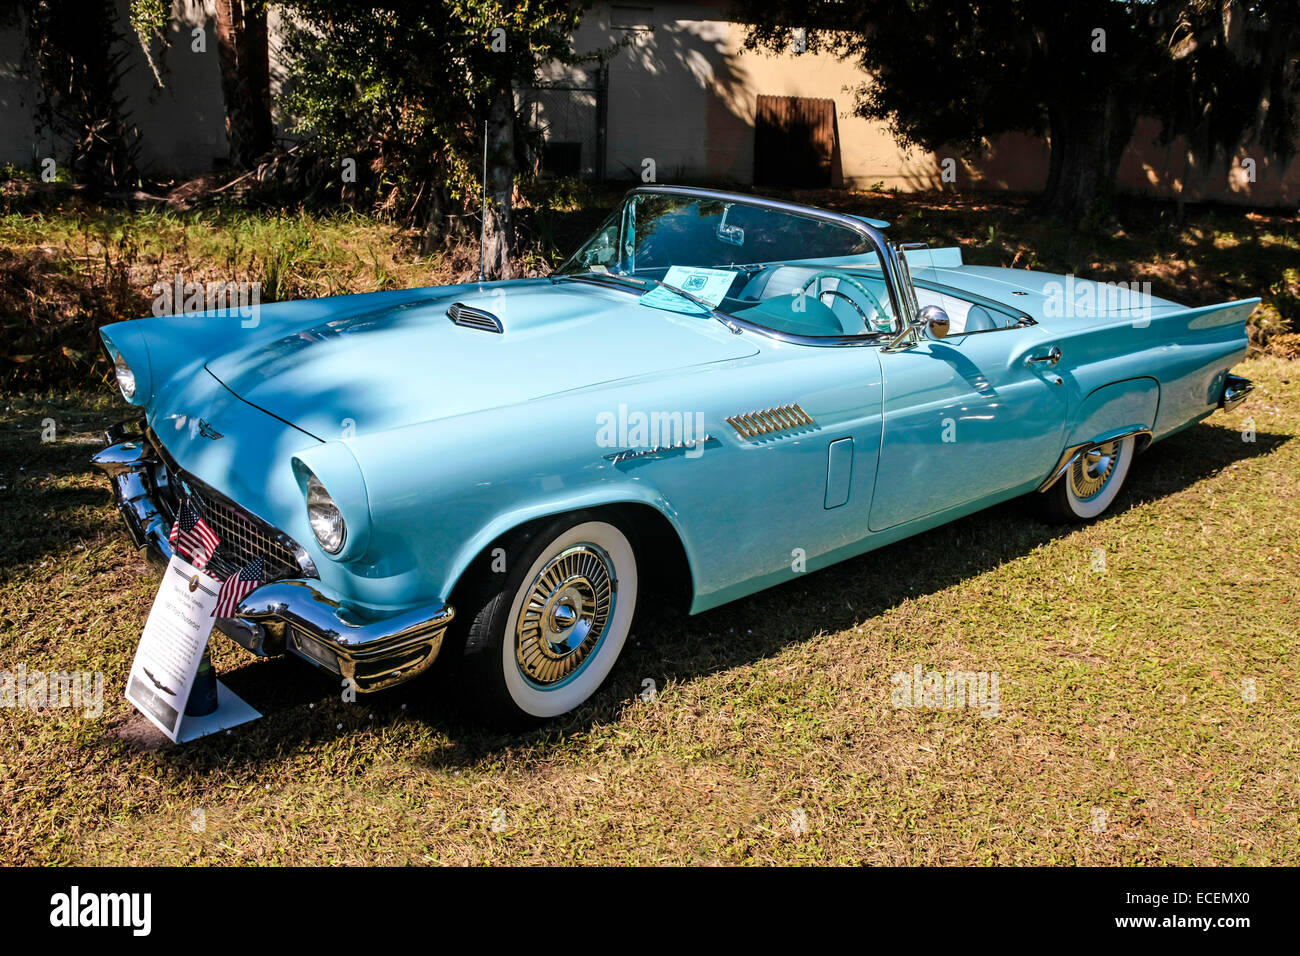 1957 Powder-blue Ford Thunderbird car on display at a vintage vehicle show in S. Florida Stock Photo